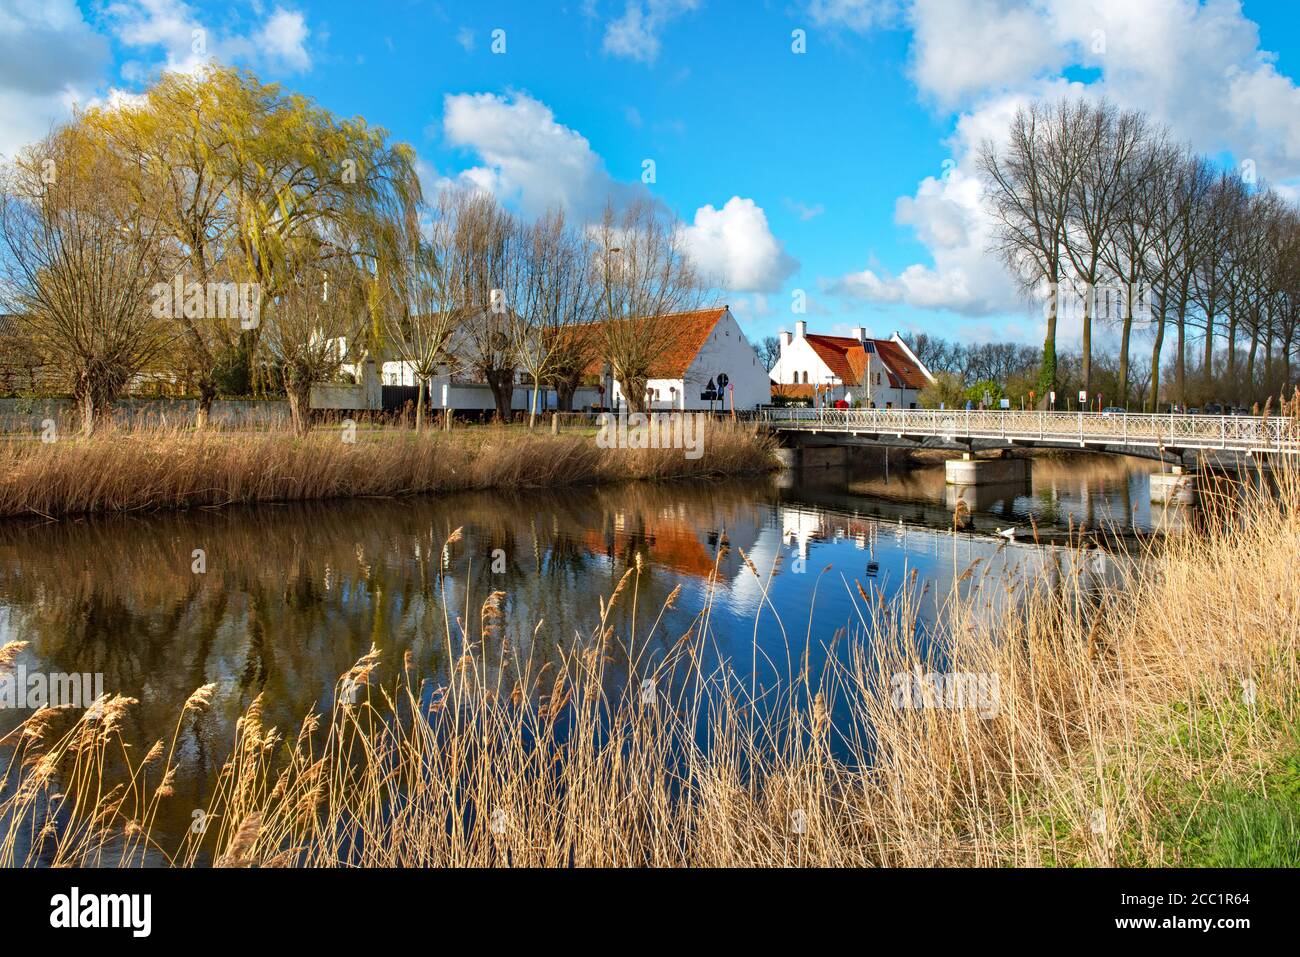 A picturesque scene in the little village of Damme, near Brugge, in Belgium Stock Photo